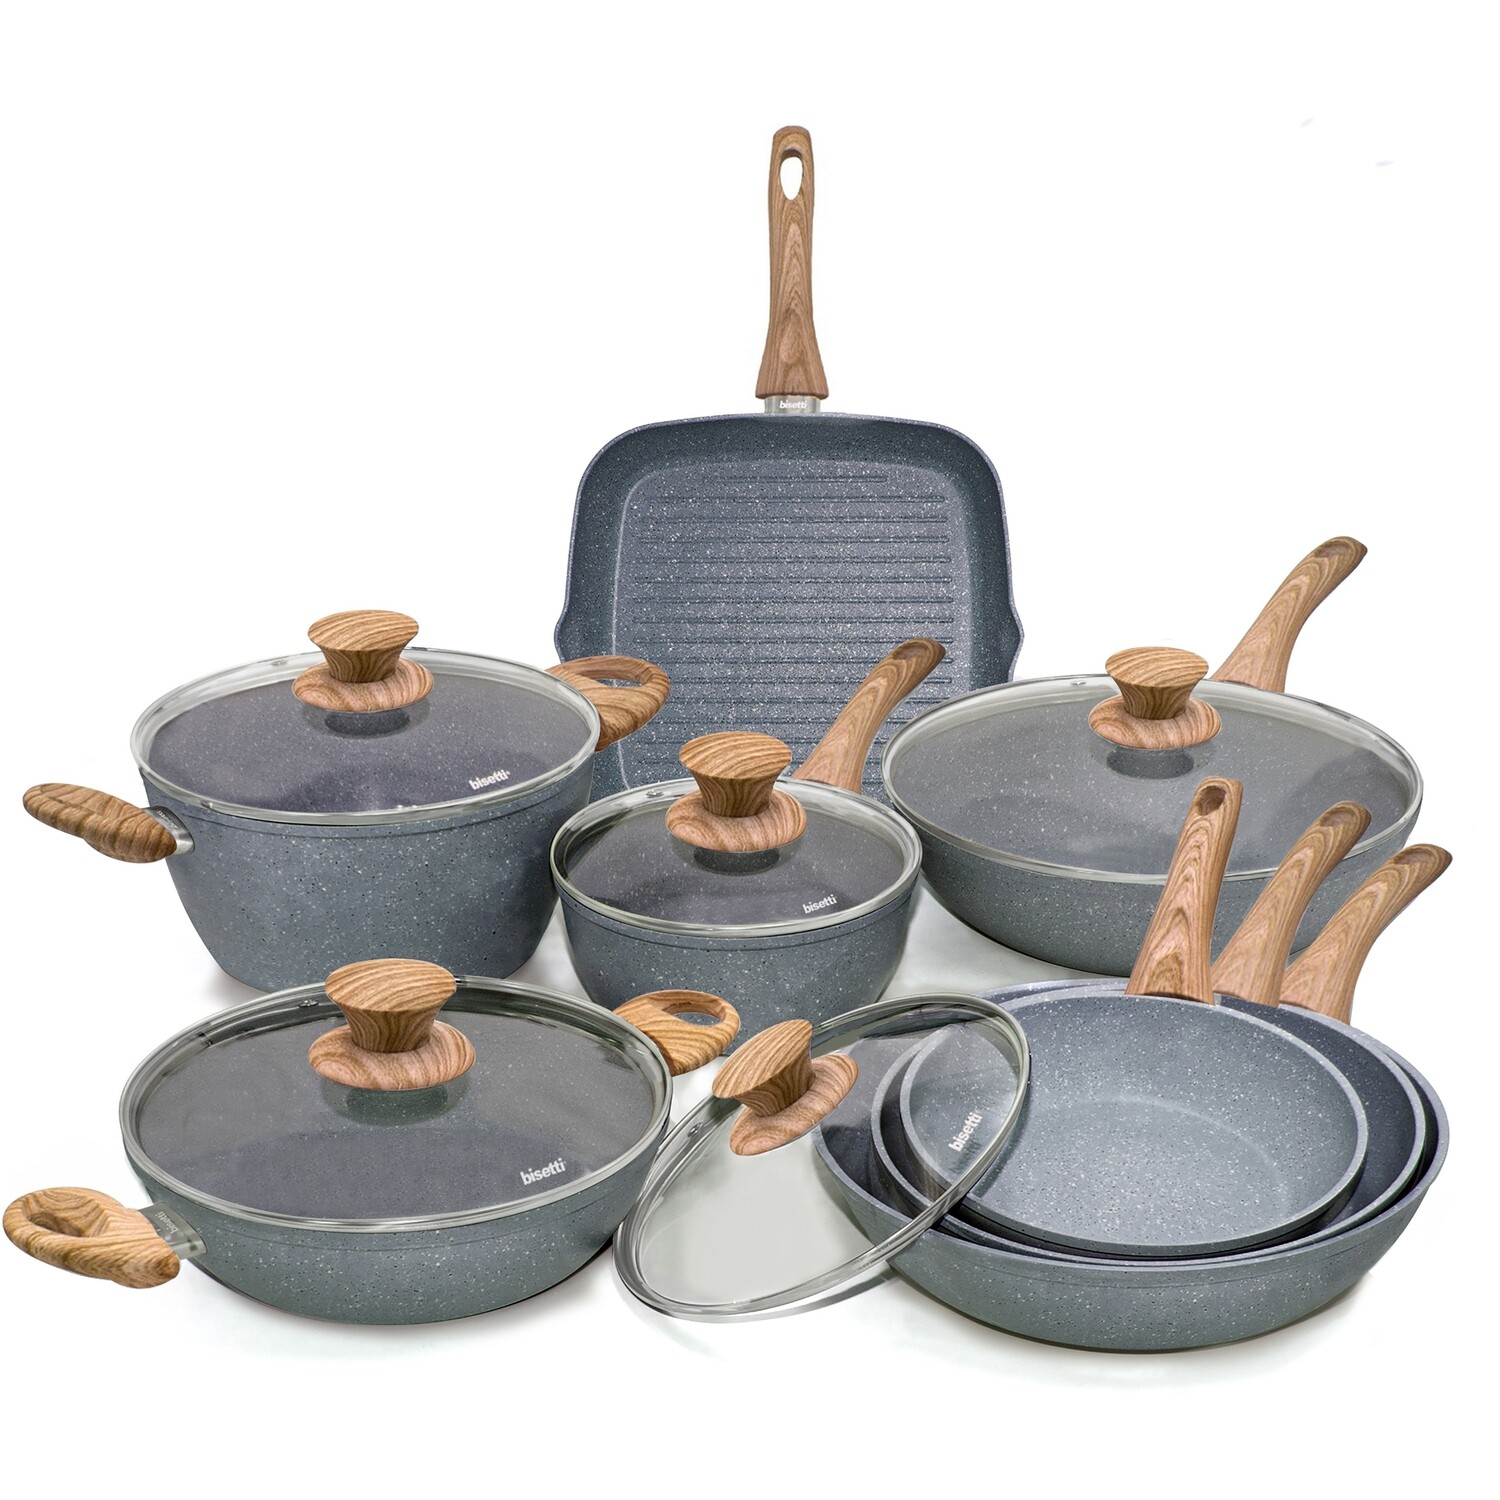 13 pieces cookware set 'Pierre Gourmet' with natural wood colour handles